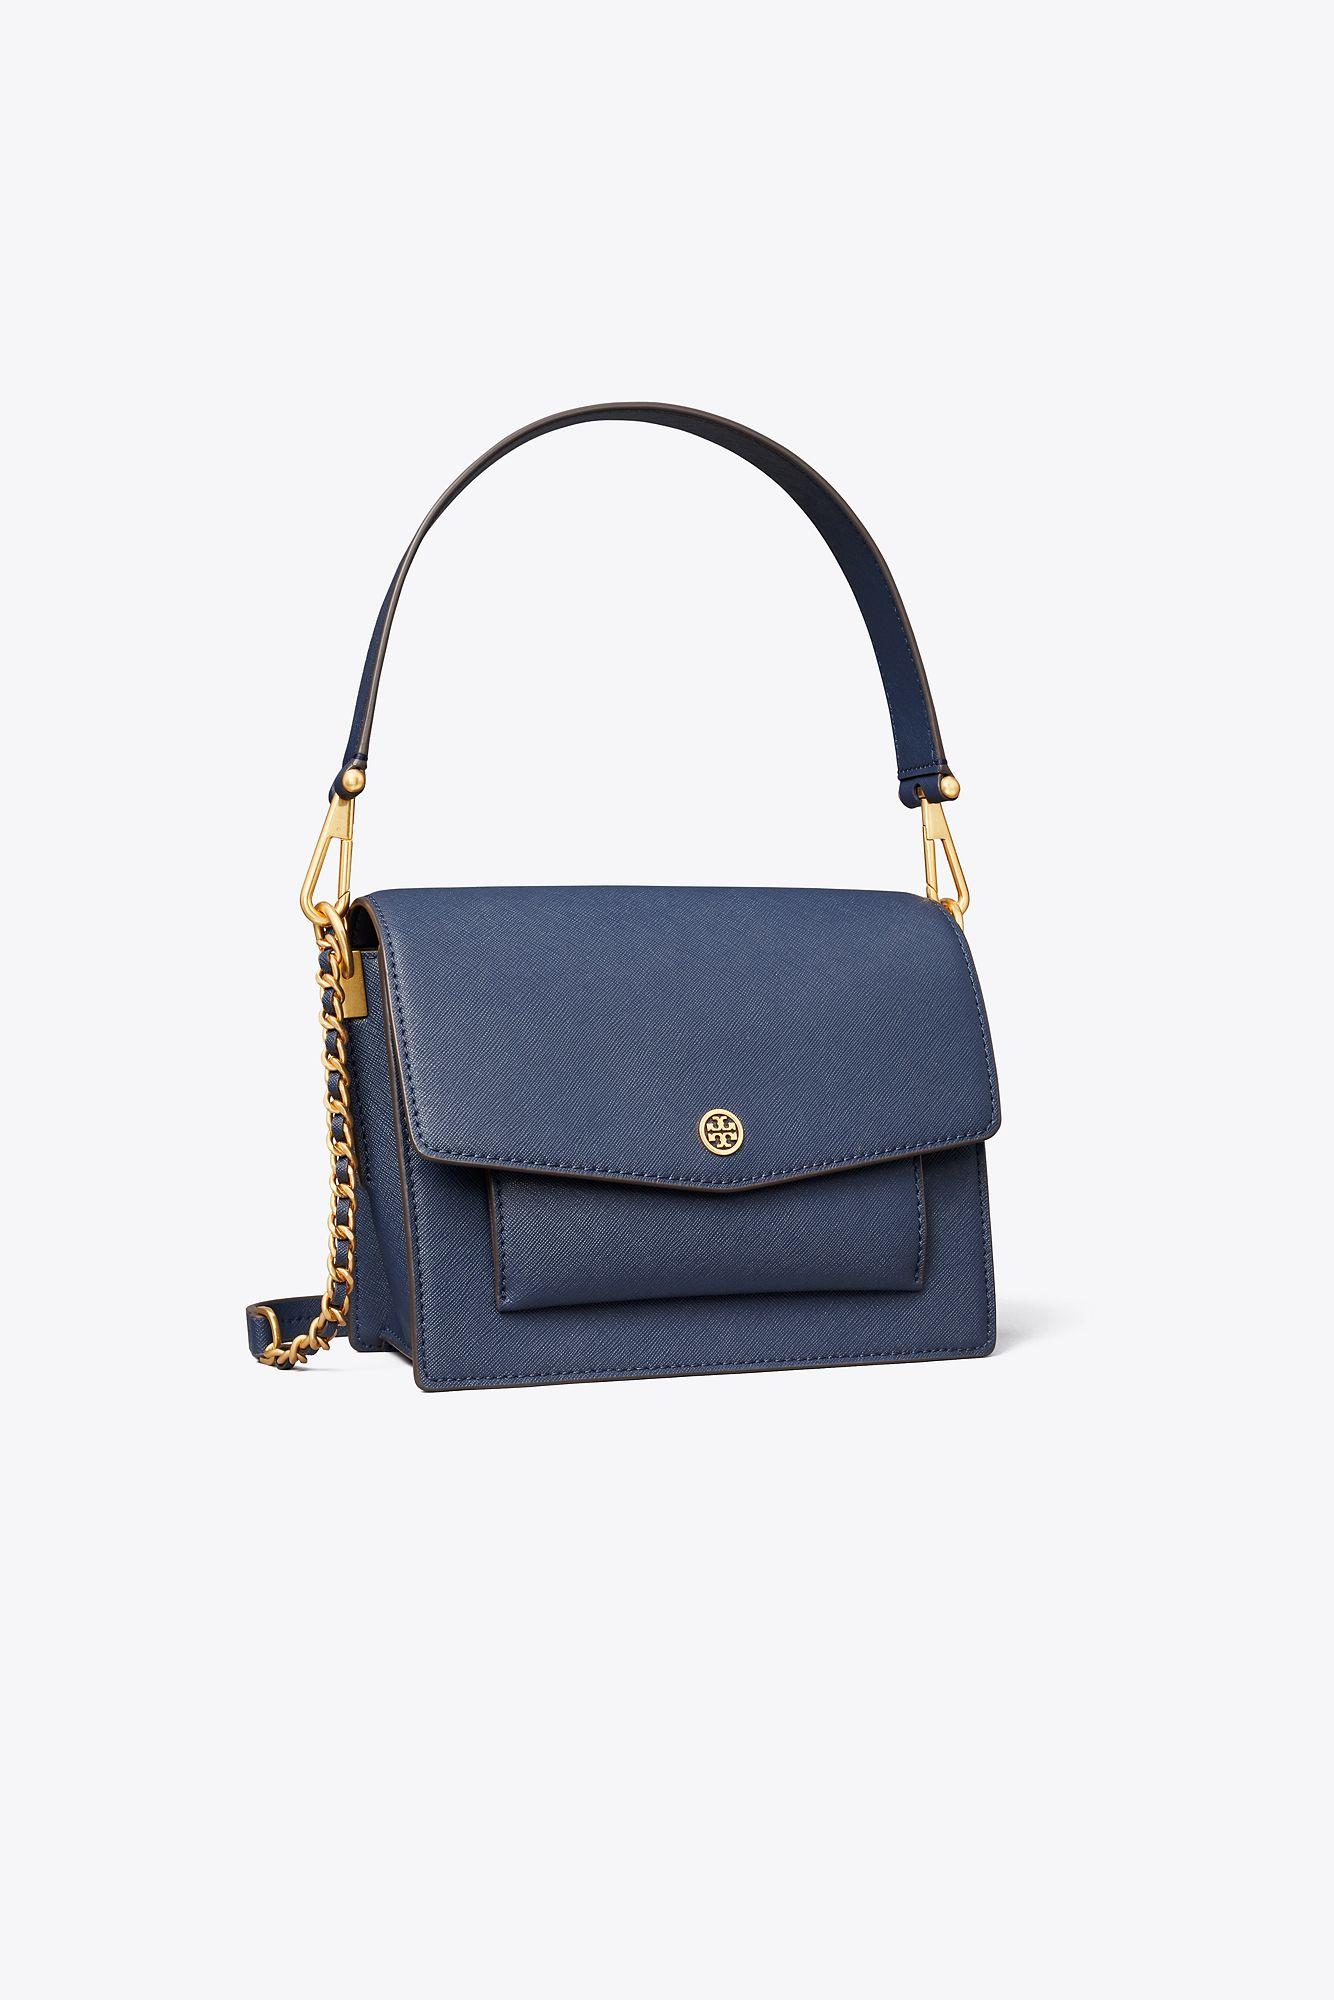 Tory Burch Robinson Double-strap Convertible Shoulder Bag in Blue | Lyst